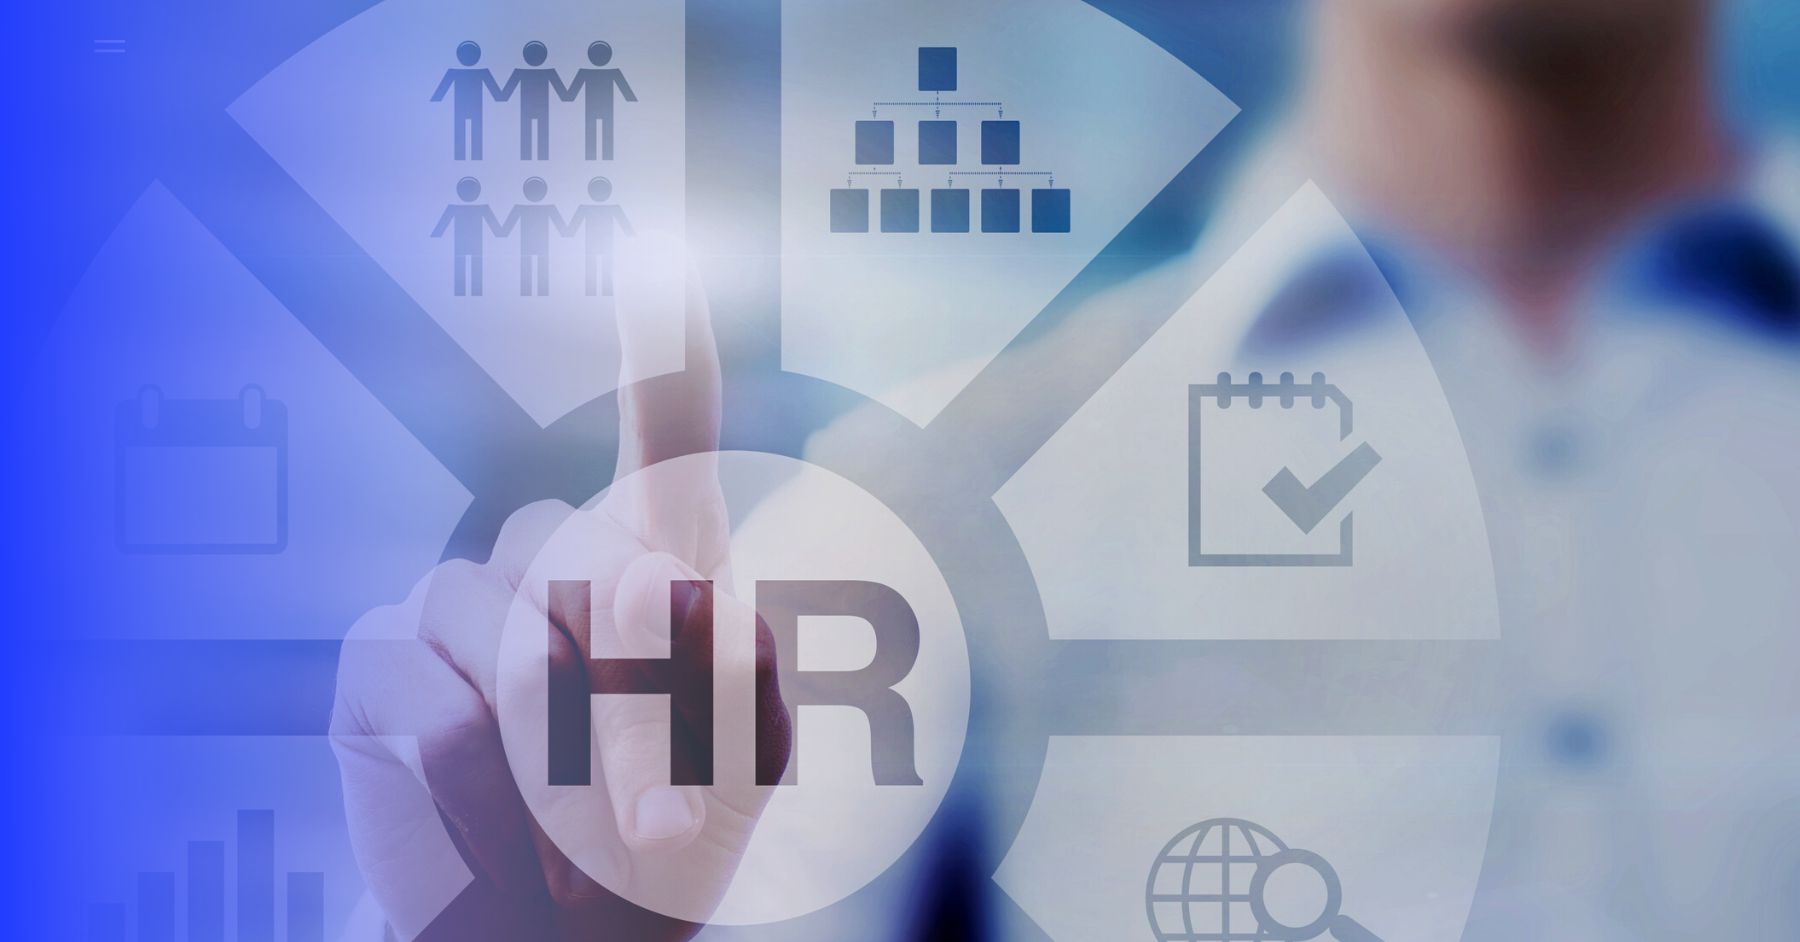 The HR Scorecard: Linking People, Strategy, and Performance